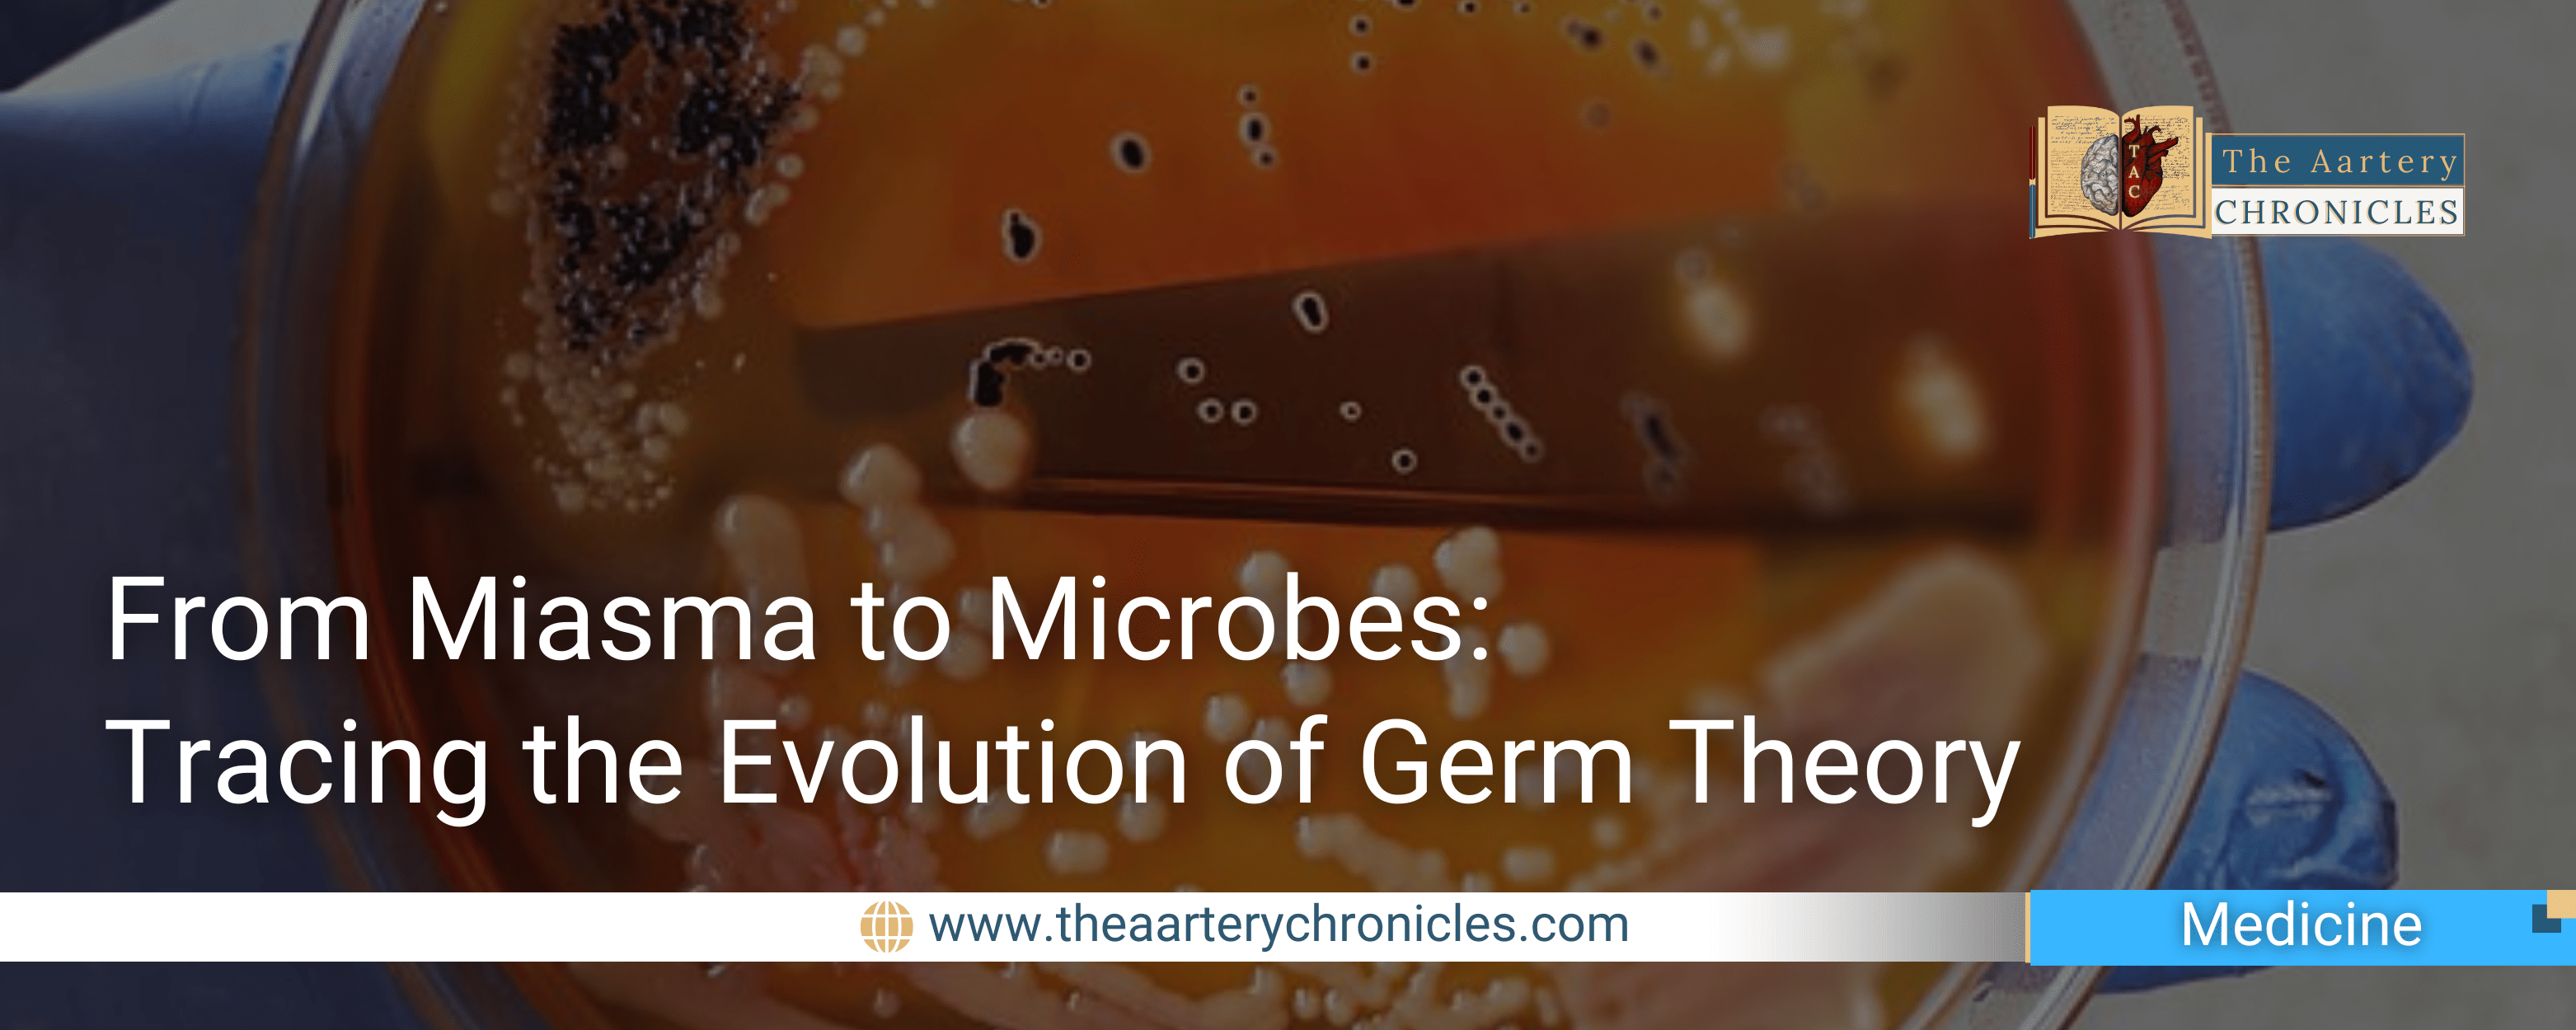 From Miasma to Microbes: Tracing the Evolution of Germ Theory​